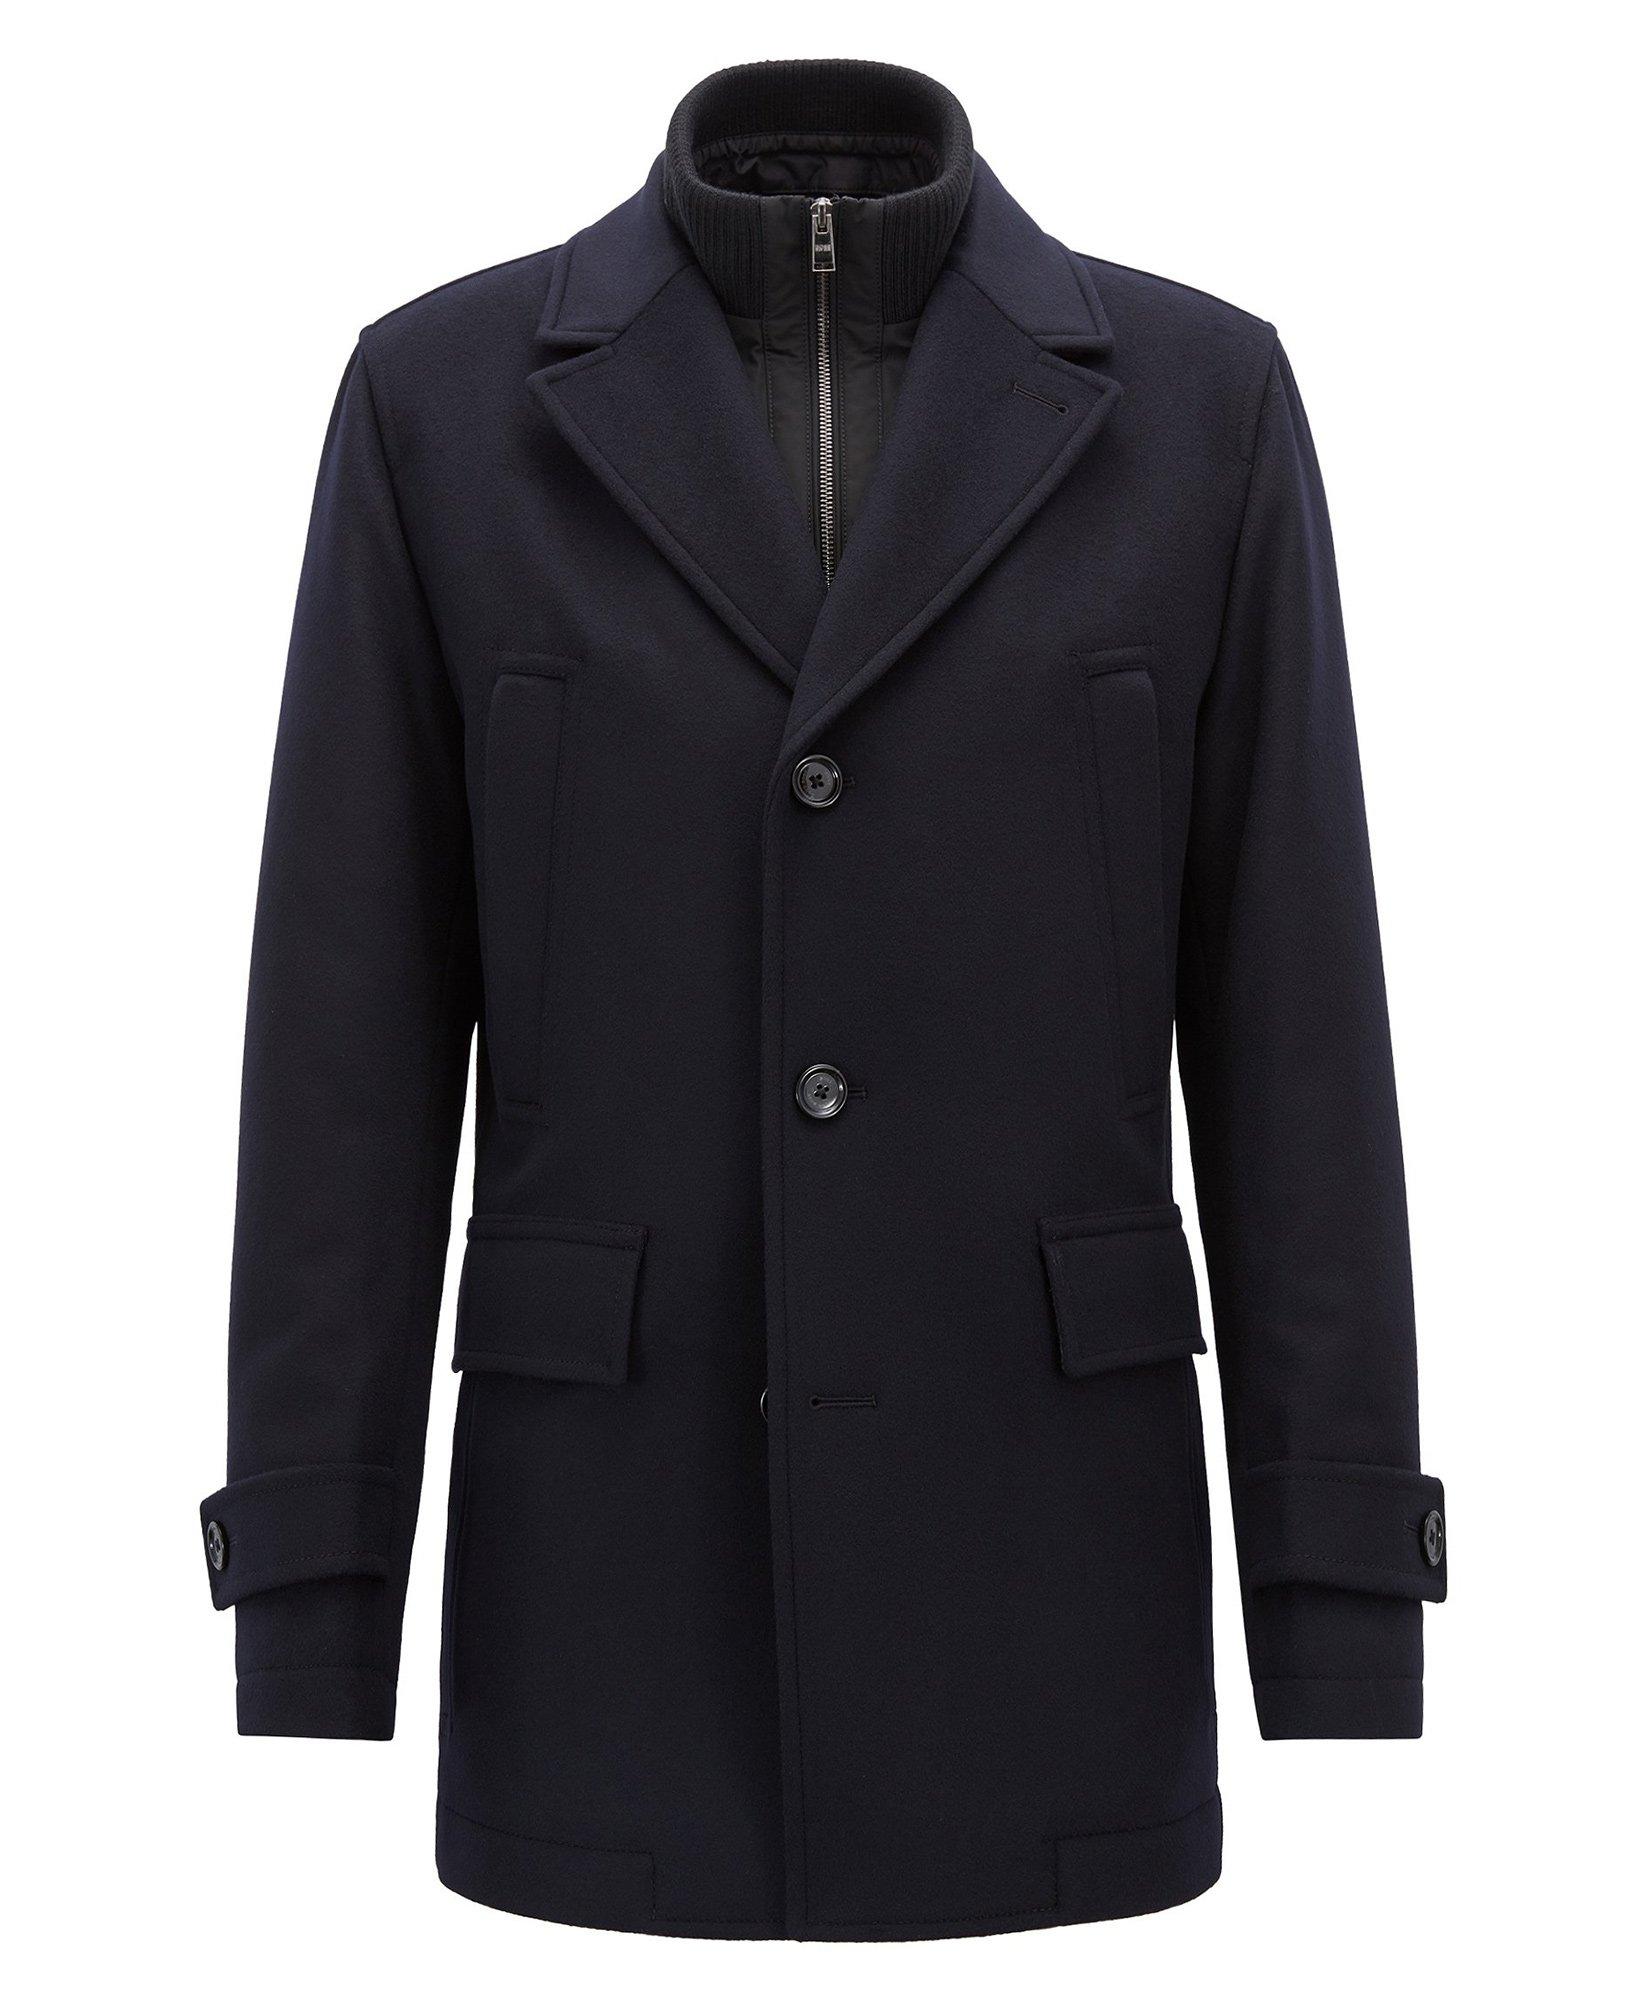 Conway Wool & Cashmere Coat image 0